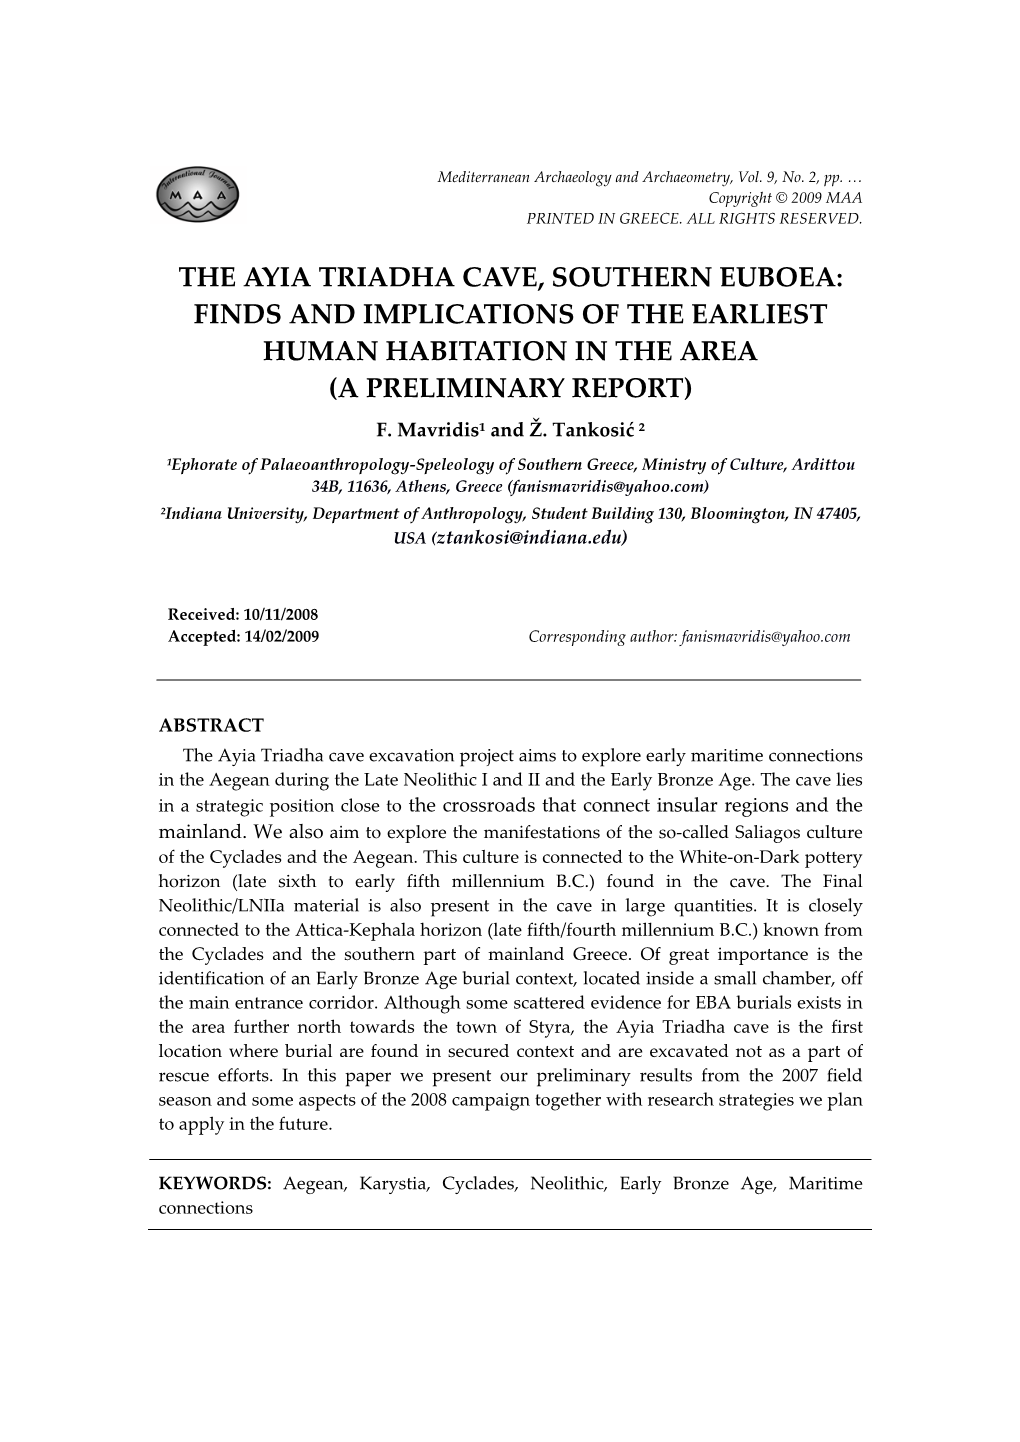 The Ayia Triadha Cave, Southern Euboea: Finds and Implications of the Earliest Human Habitation in the Area (A Preliminary Report)